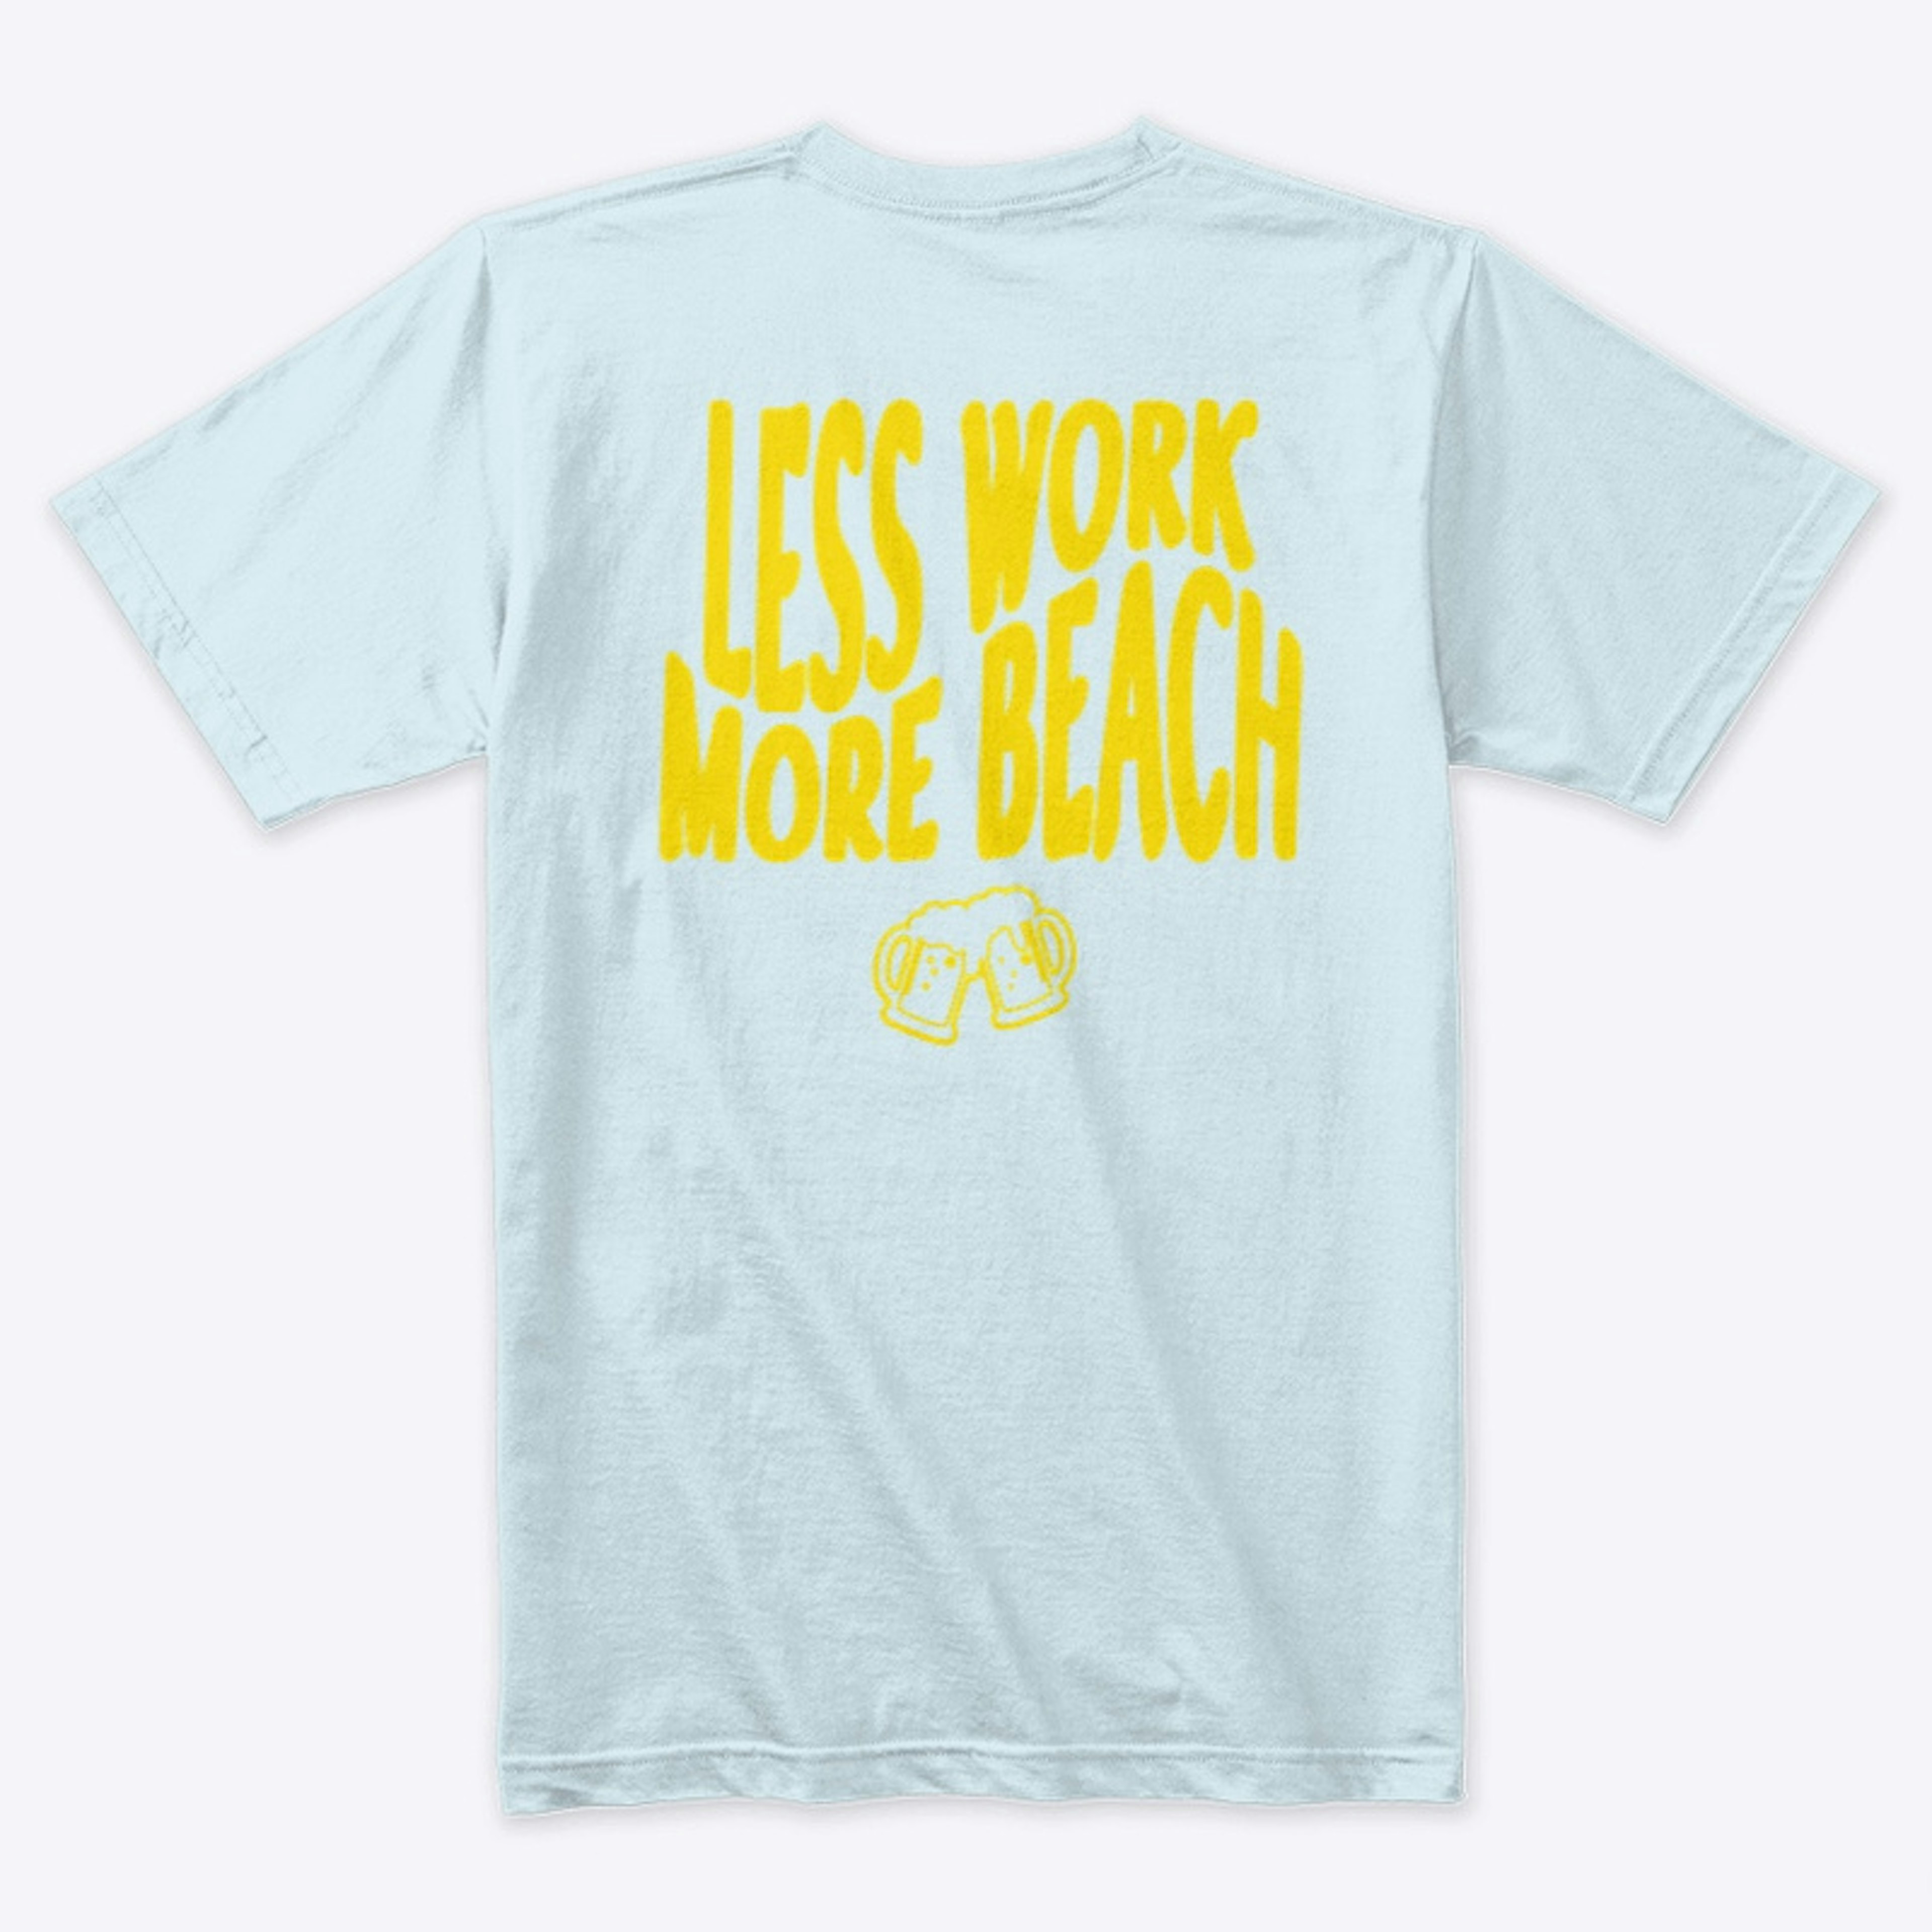 Less Work More Beach Collection